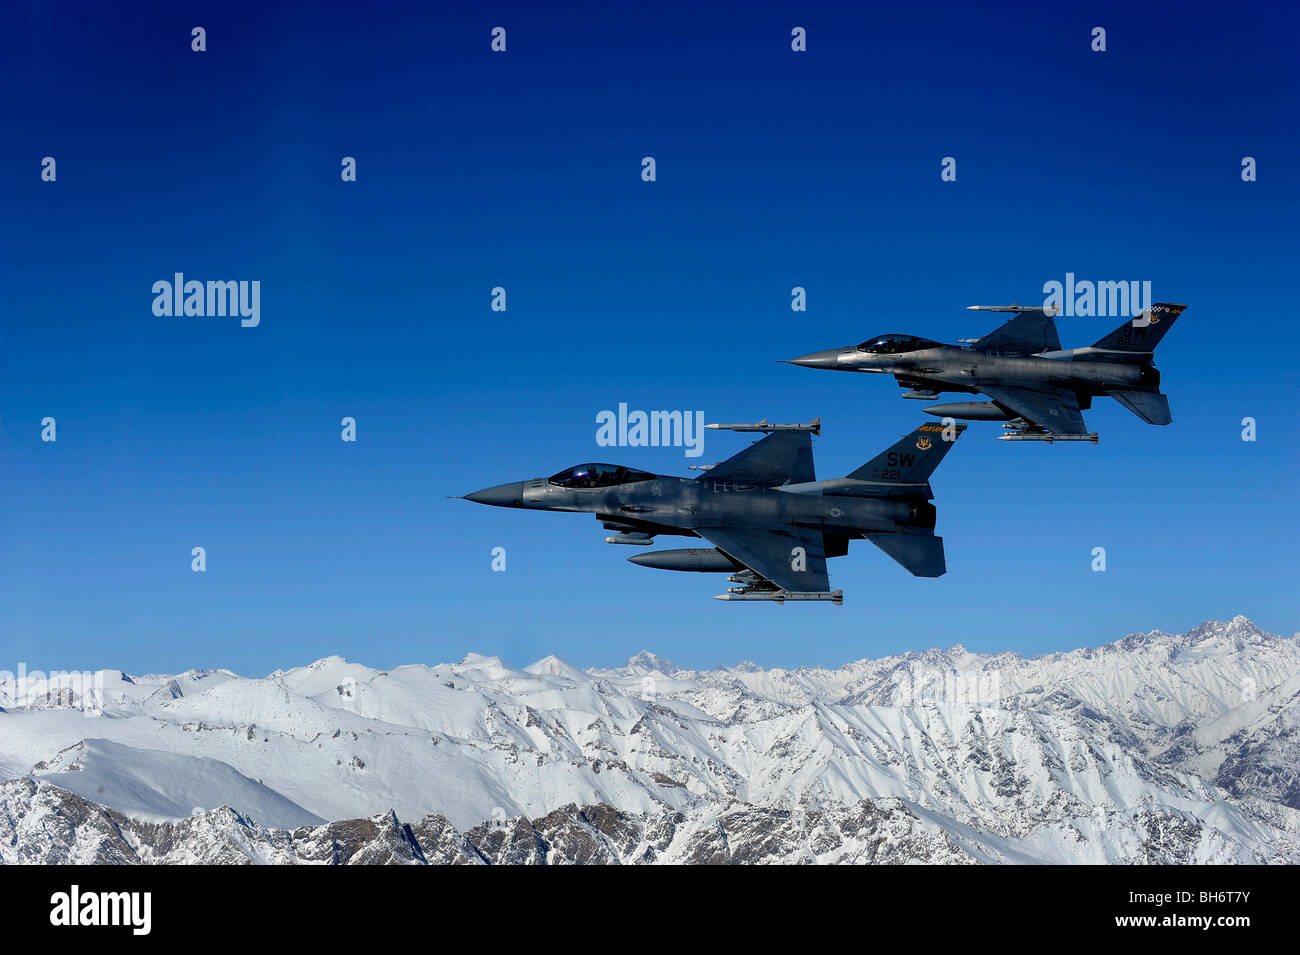 November 26, 2009 - U.S. Air Force F-16 Fighting Falcons conduct operations over eastern Afghanistan. Stock Photo